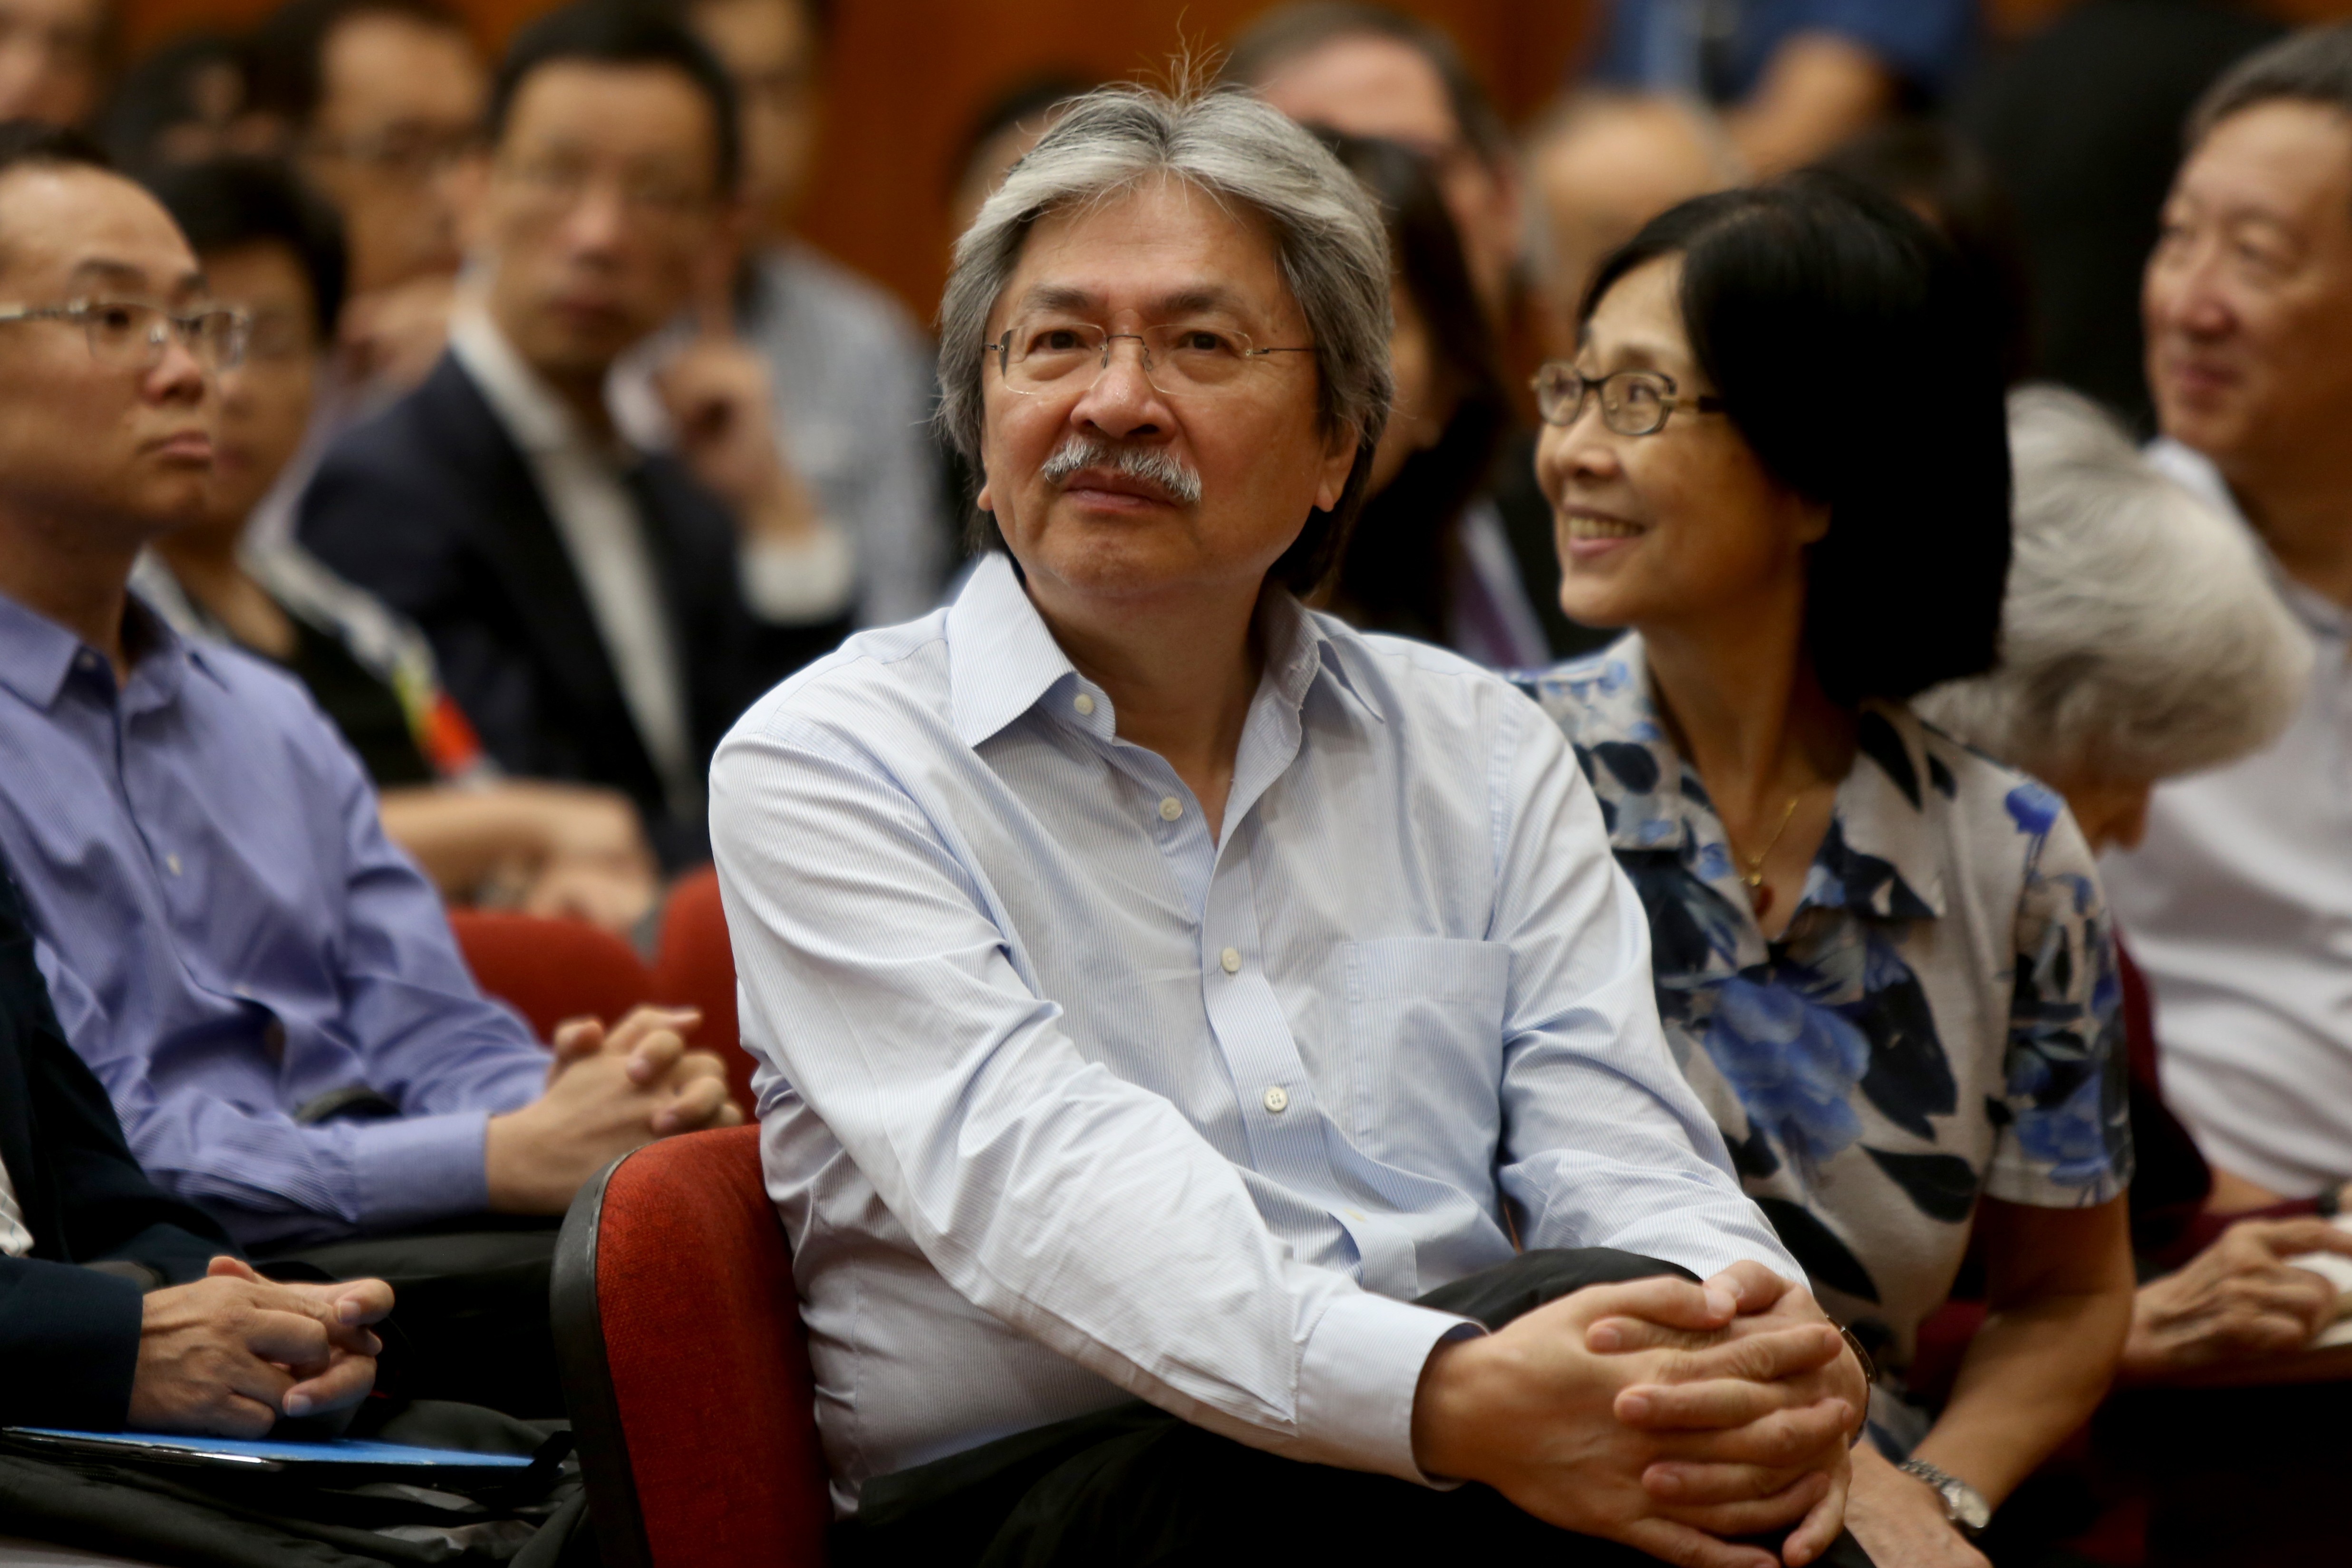 Former financial secretary John Tsang Chun-wah accused public broadcaster RTHK of suspending promotion of a television series featuring him as the host. Photo: Xiaomei Chen